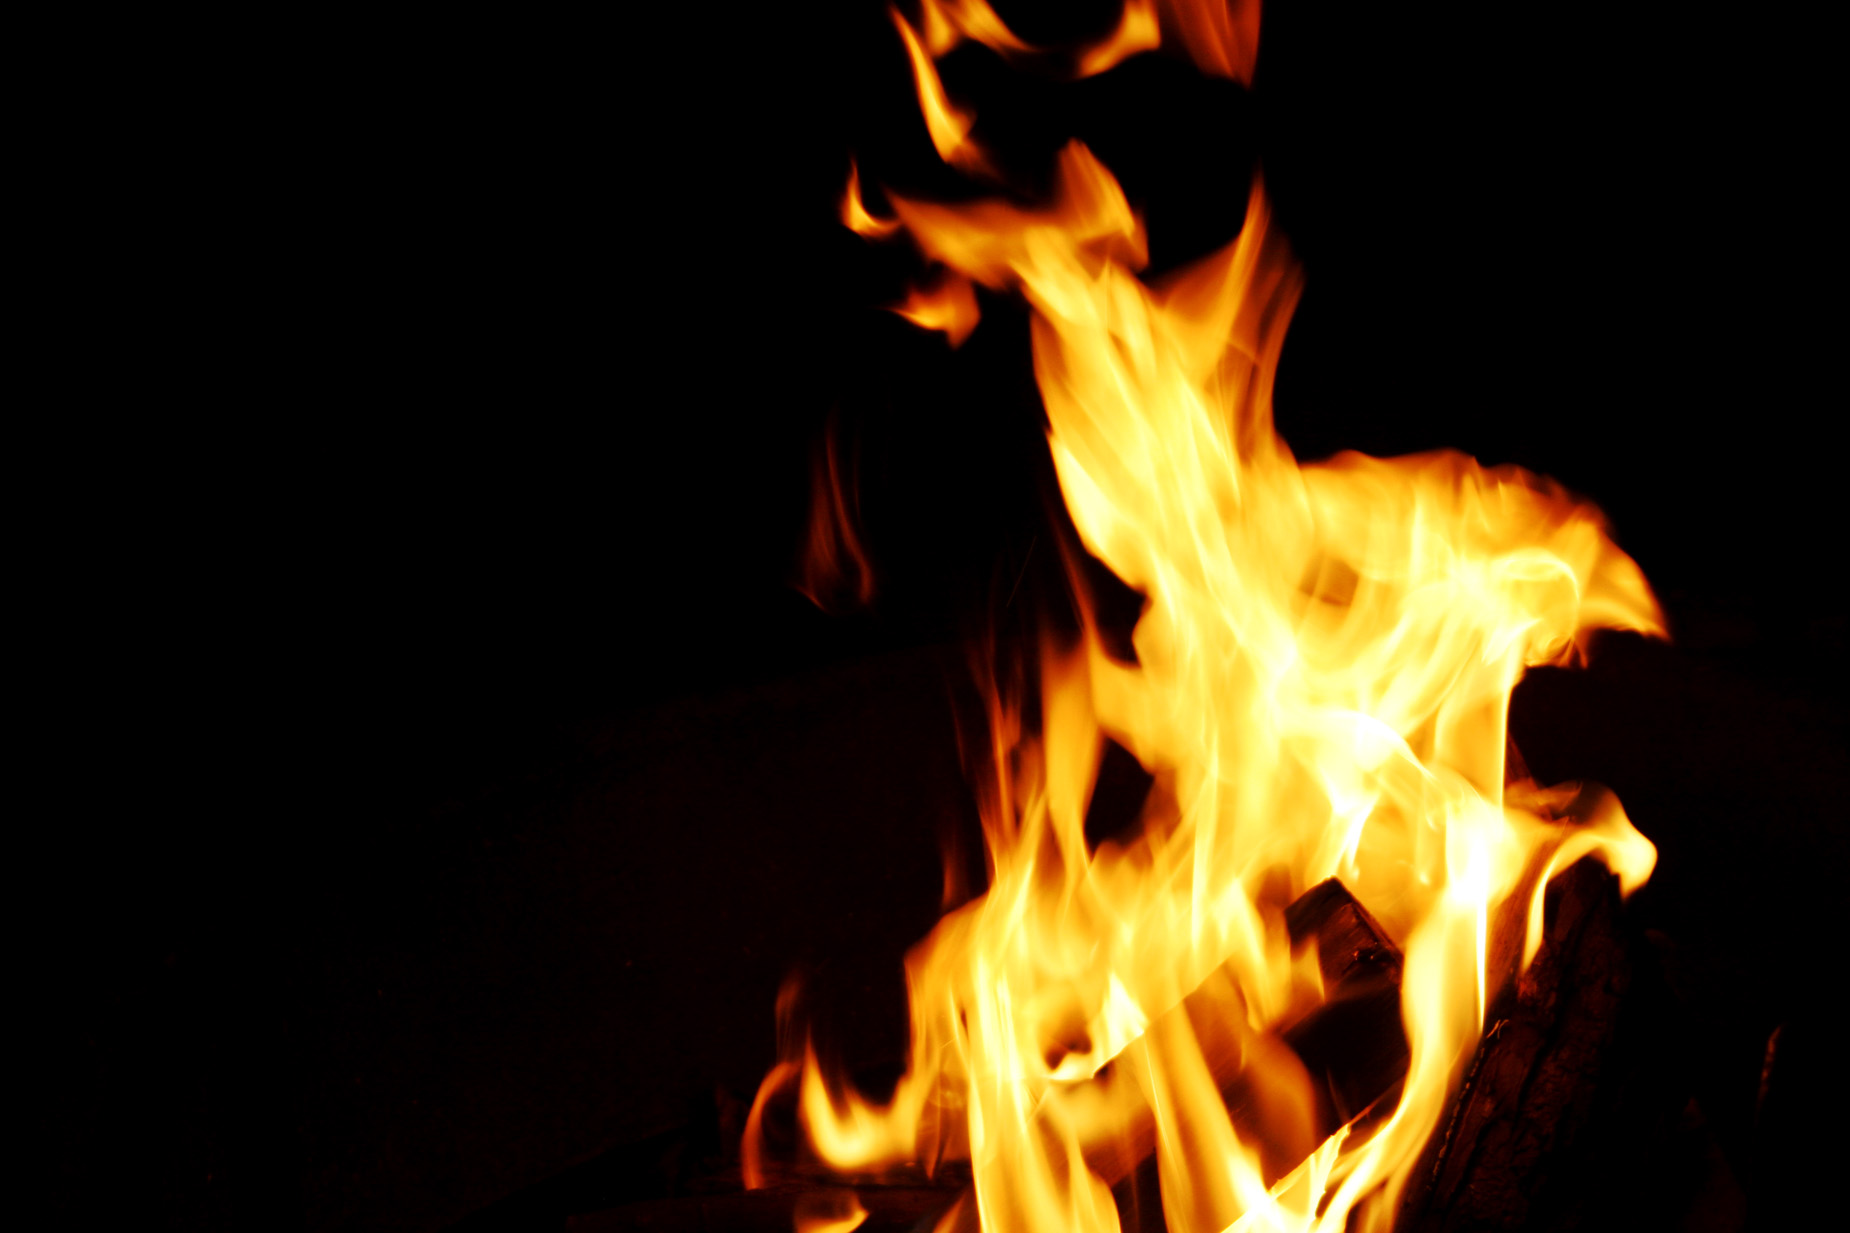 View image - Fire Flame - Abstract Influence